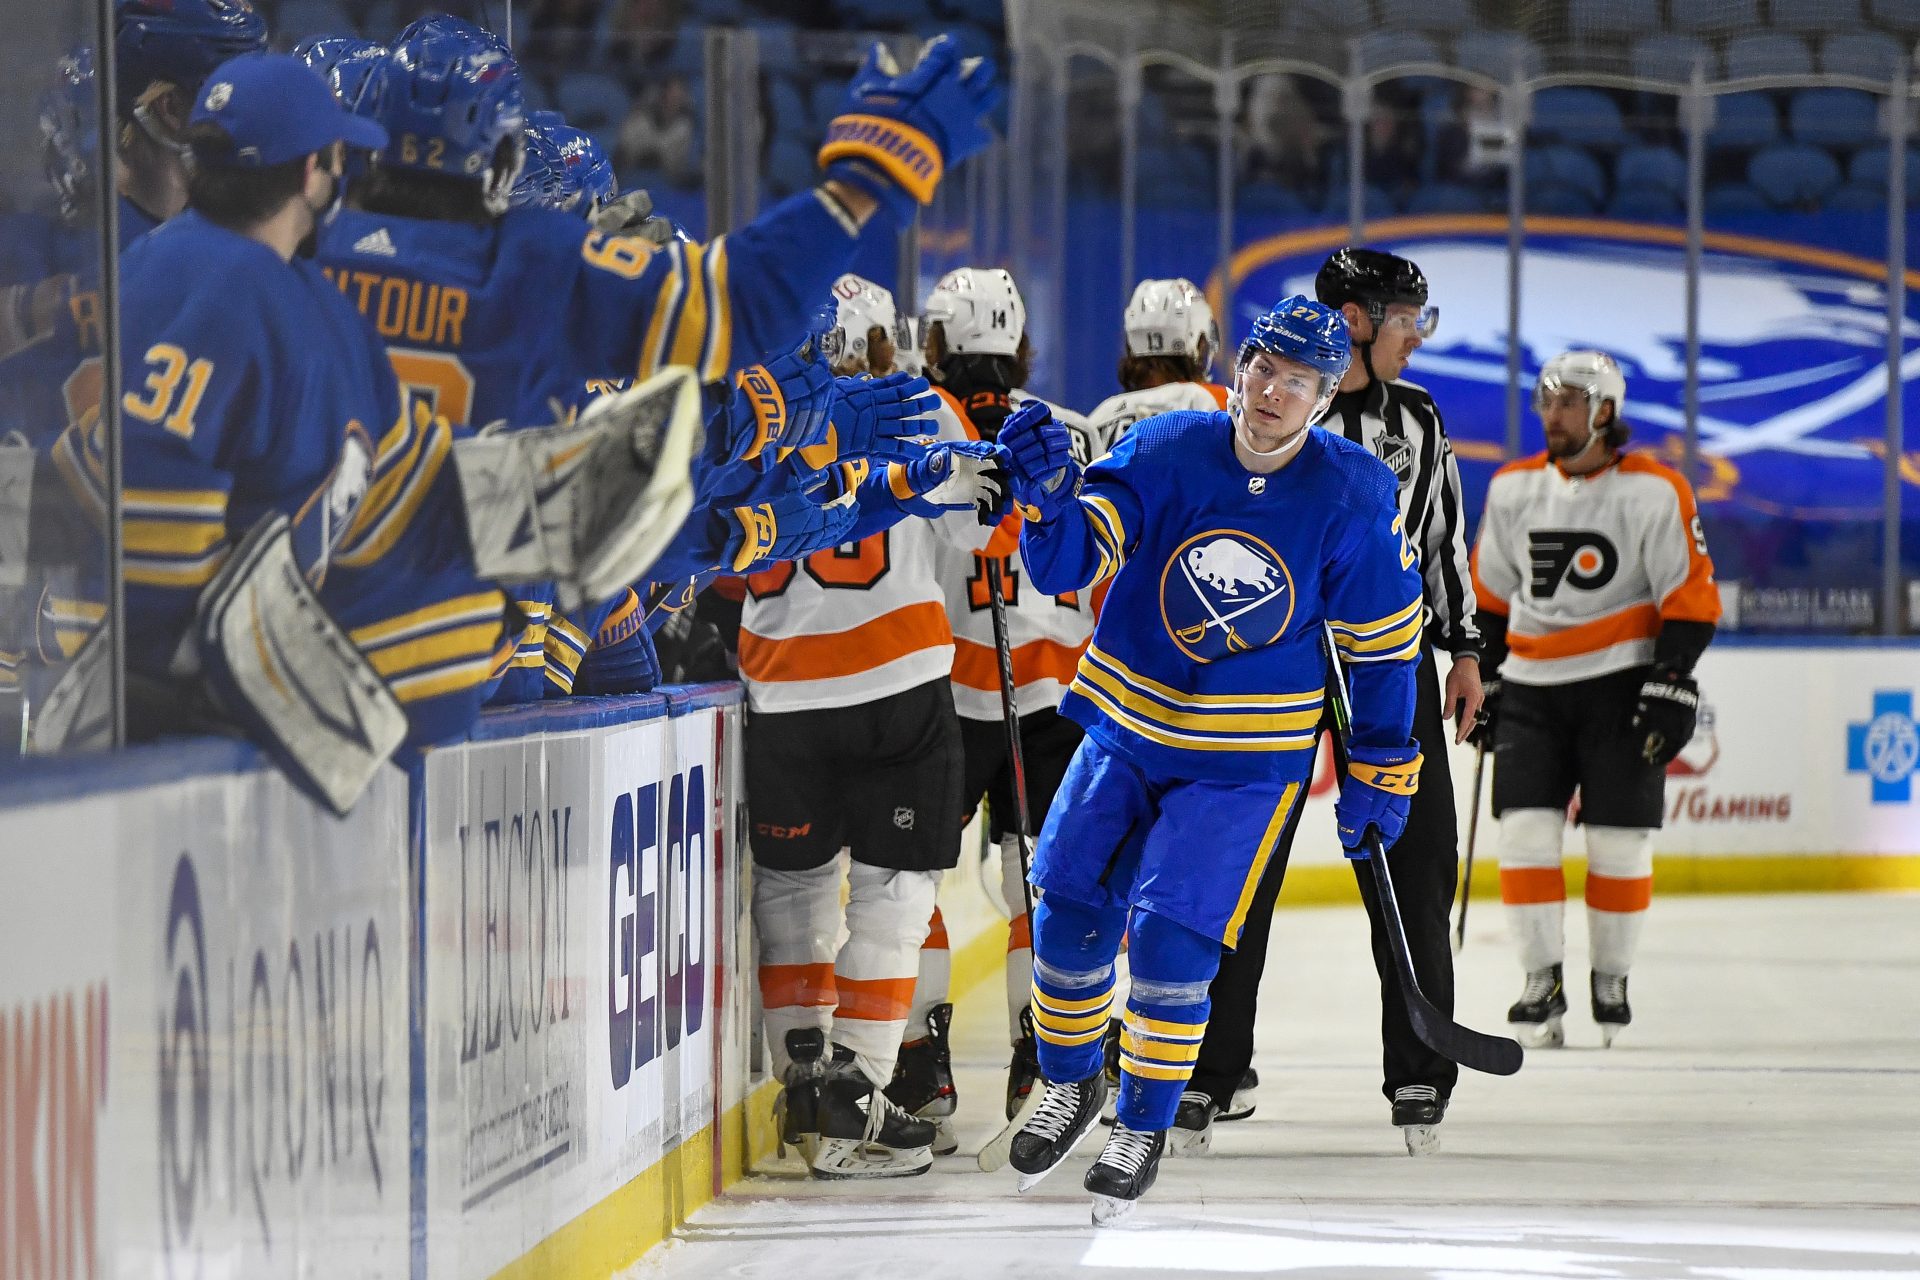 Buffalo Sabres center Curtis Lazar (27) is congratulated after scoring against the Philadelphia Flyers during the first period of an NHL hockey game in Buffalo, N.Y., Wednesday, March 31, 2021.